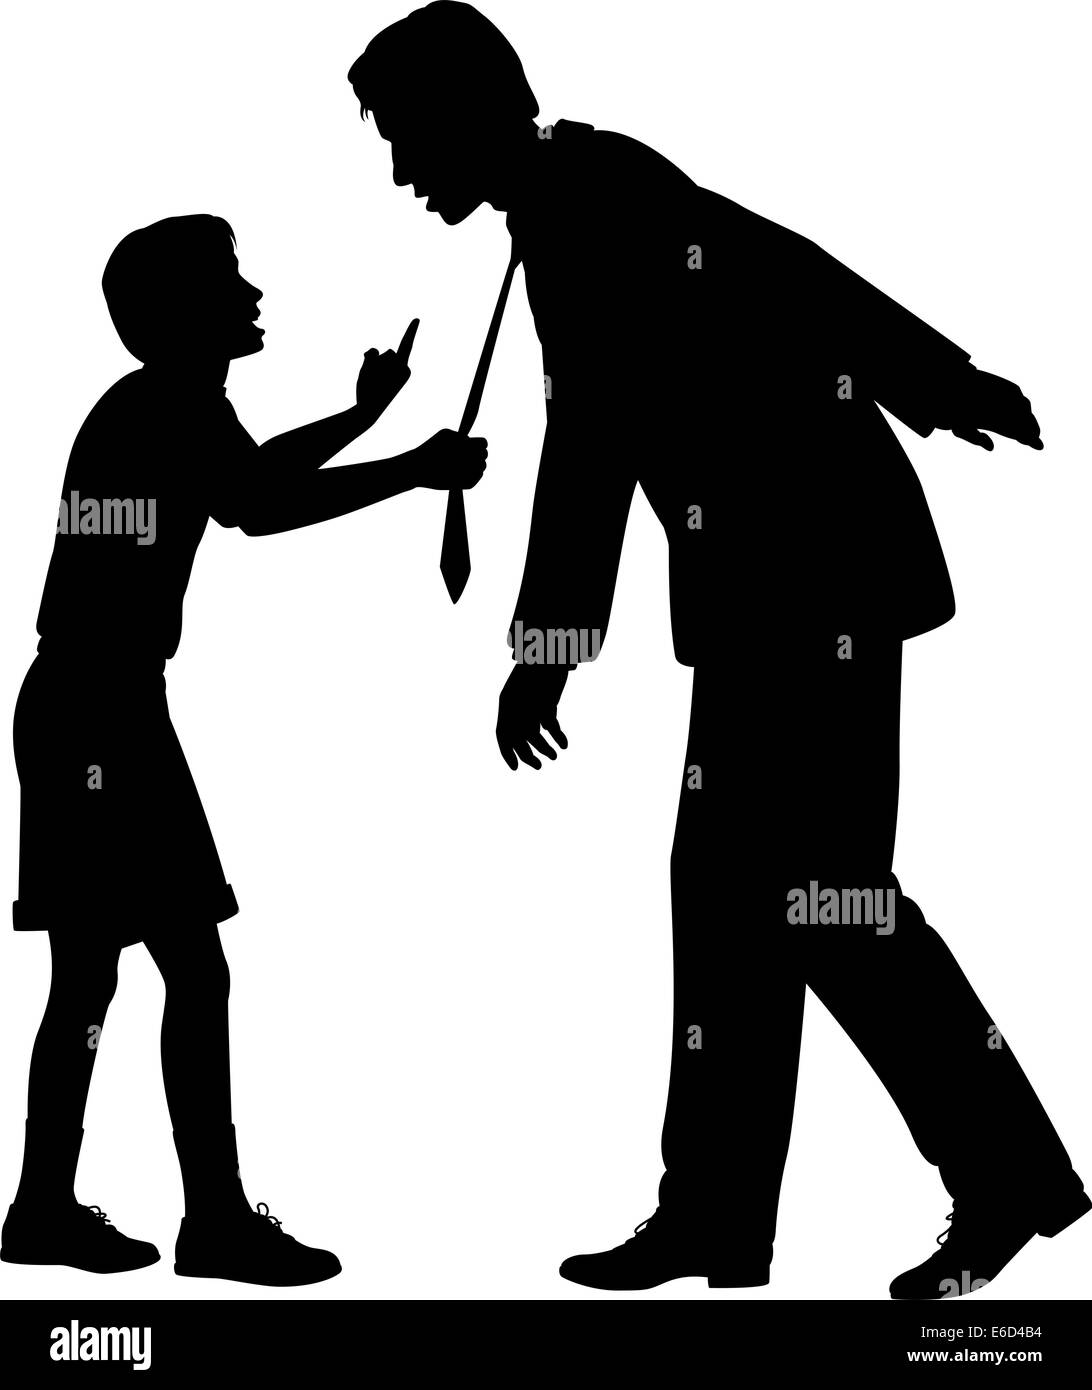 Editable vector silhouette of a young boy warning a man who could be his father or a businessman as a concept of responsibility Stock Vector